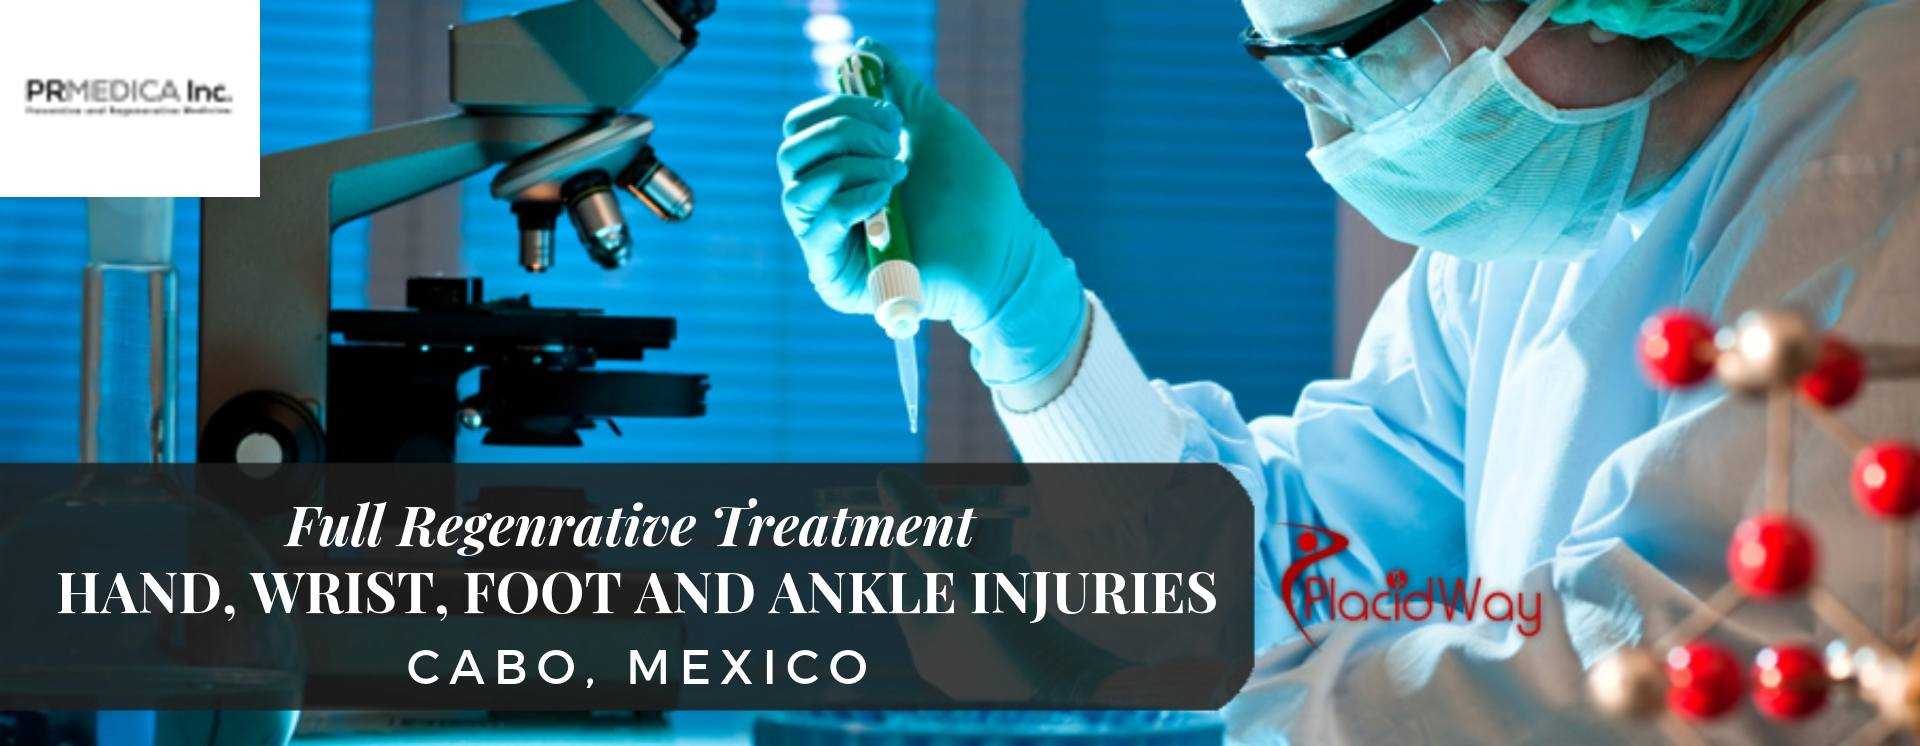 Full Regenrative Treatment Hand, Wrist, Foot and Anke in Cabo, Mexico